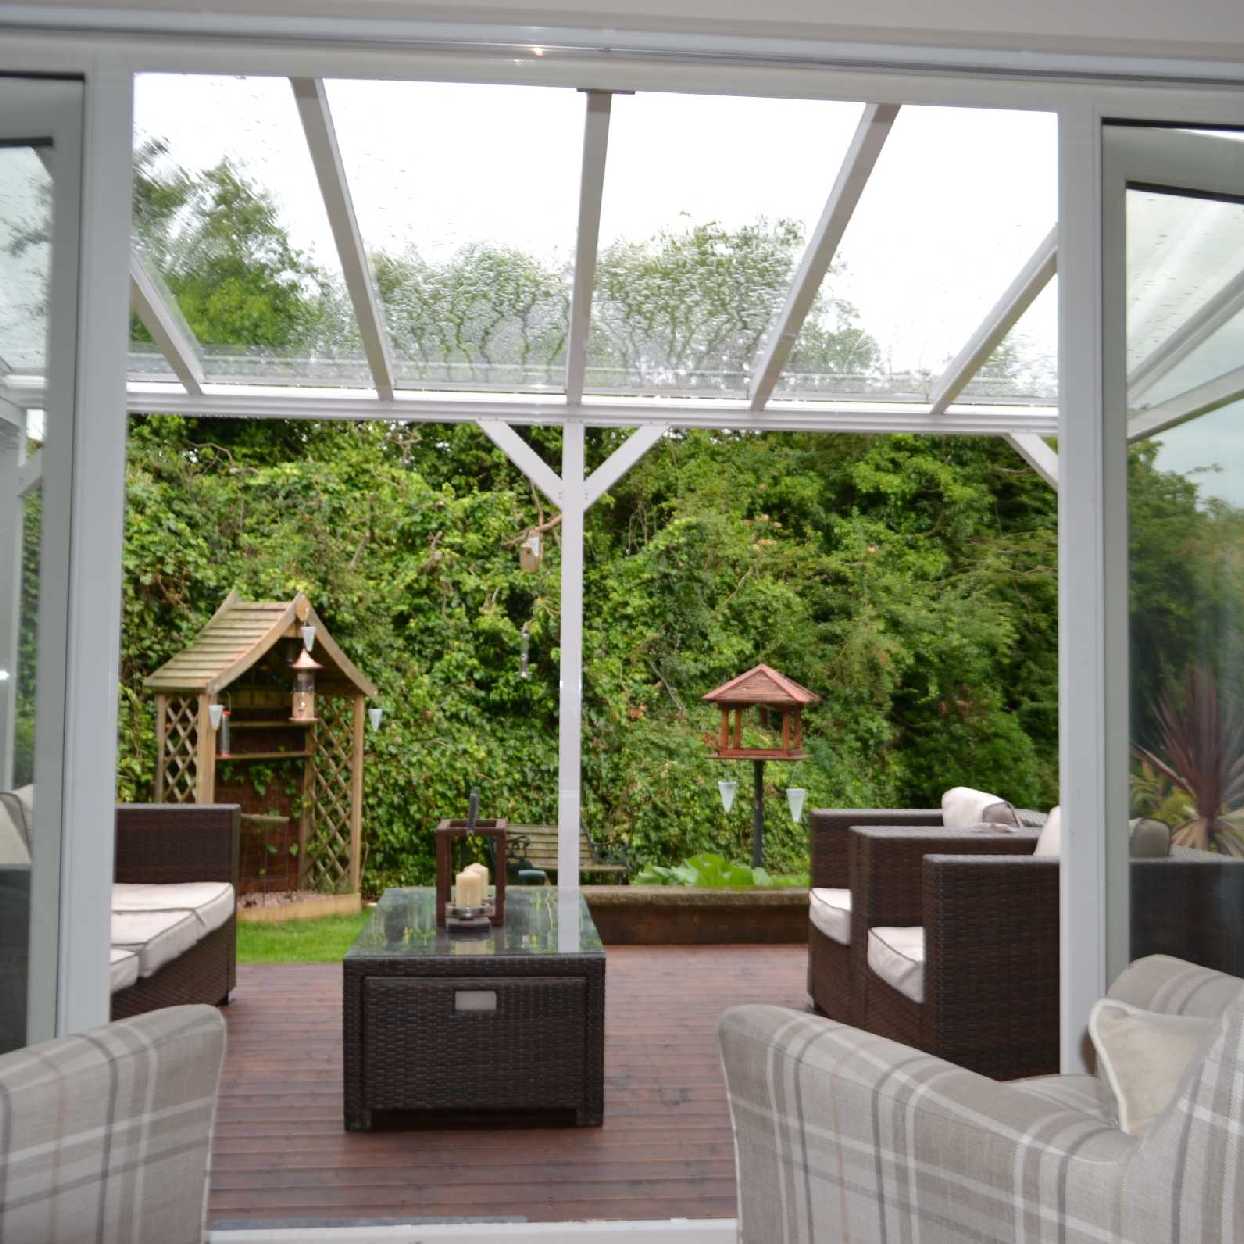 Great selection of Omega Smart Lean-To Canopy, White UNGLAZED for 6mm Glazing - 5.6m (W) x 2.5m (P), (3) Supporting Posts